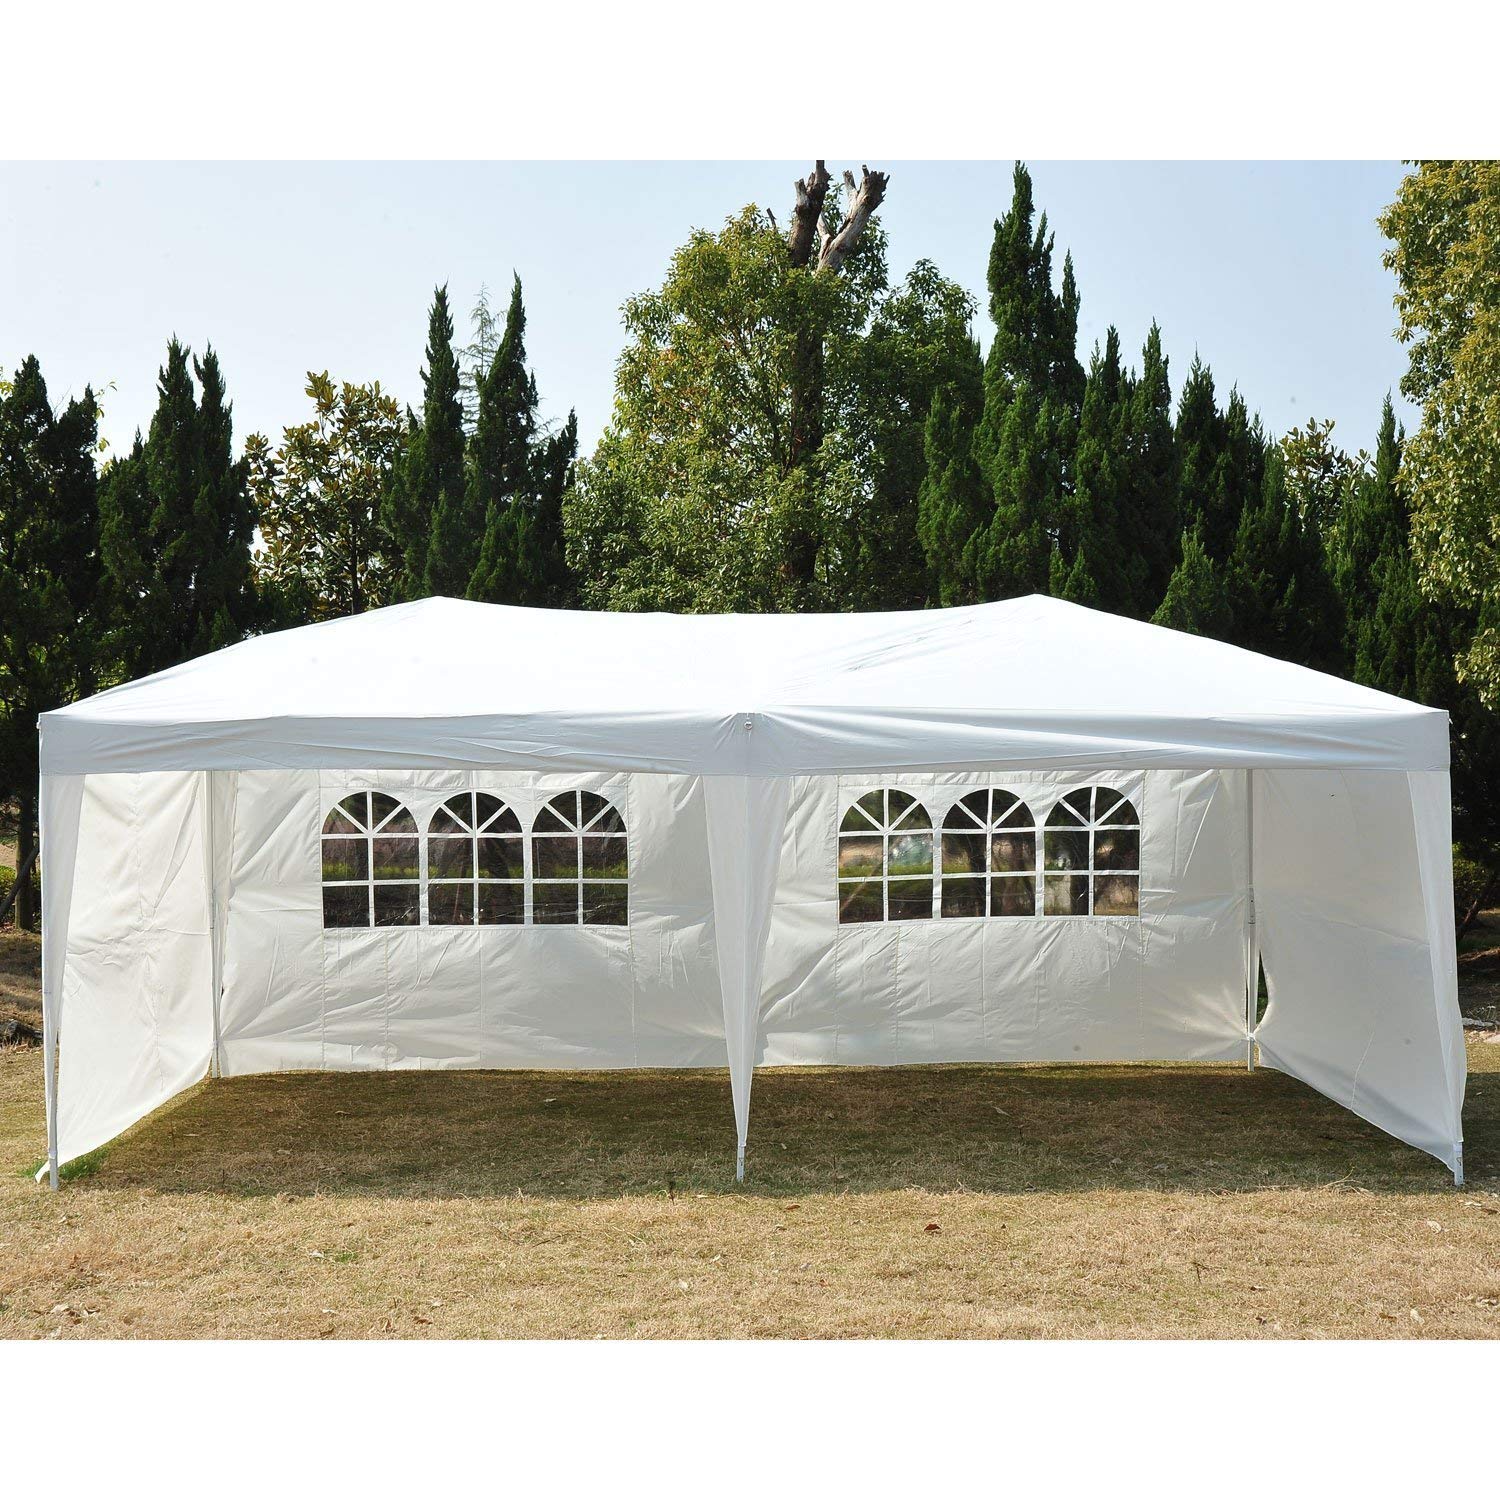 Winado 10'x20' Ez Canopy Wedding Home Party Tent Outdoor Gazebo with 4 Removable Sidewalls and Windows，White